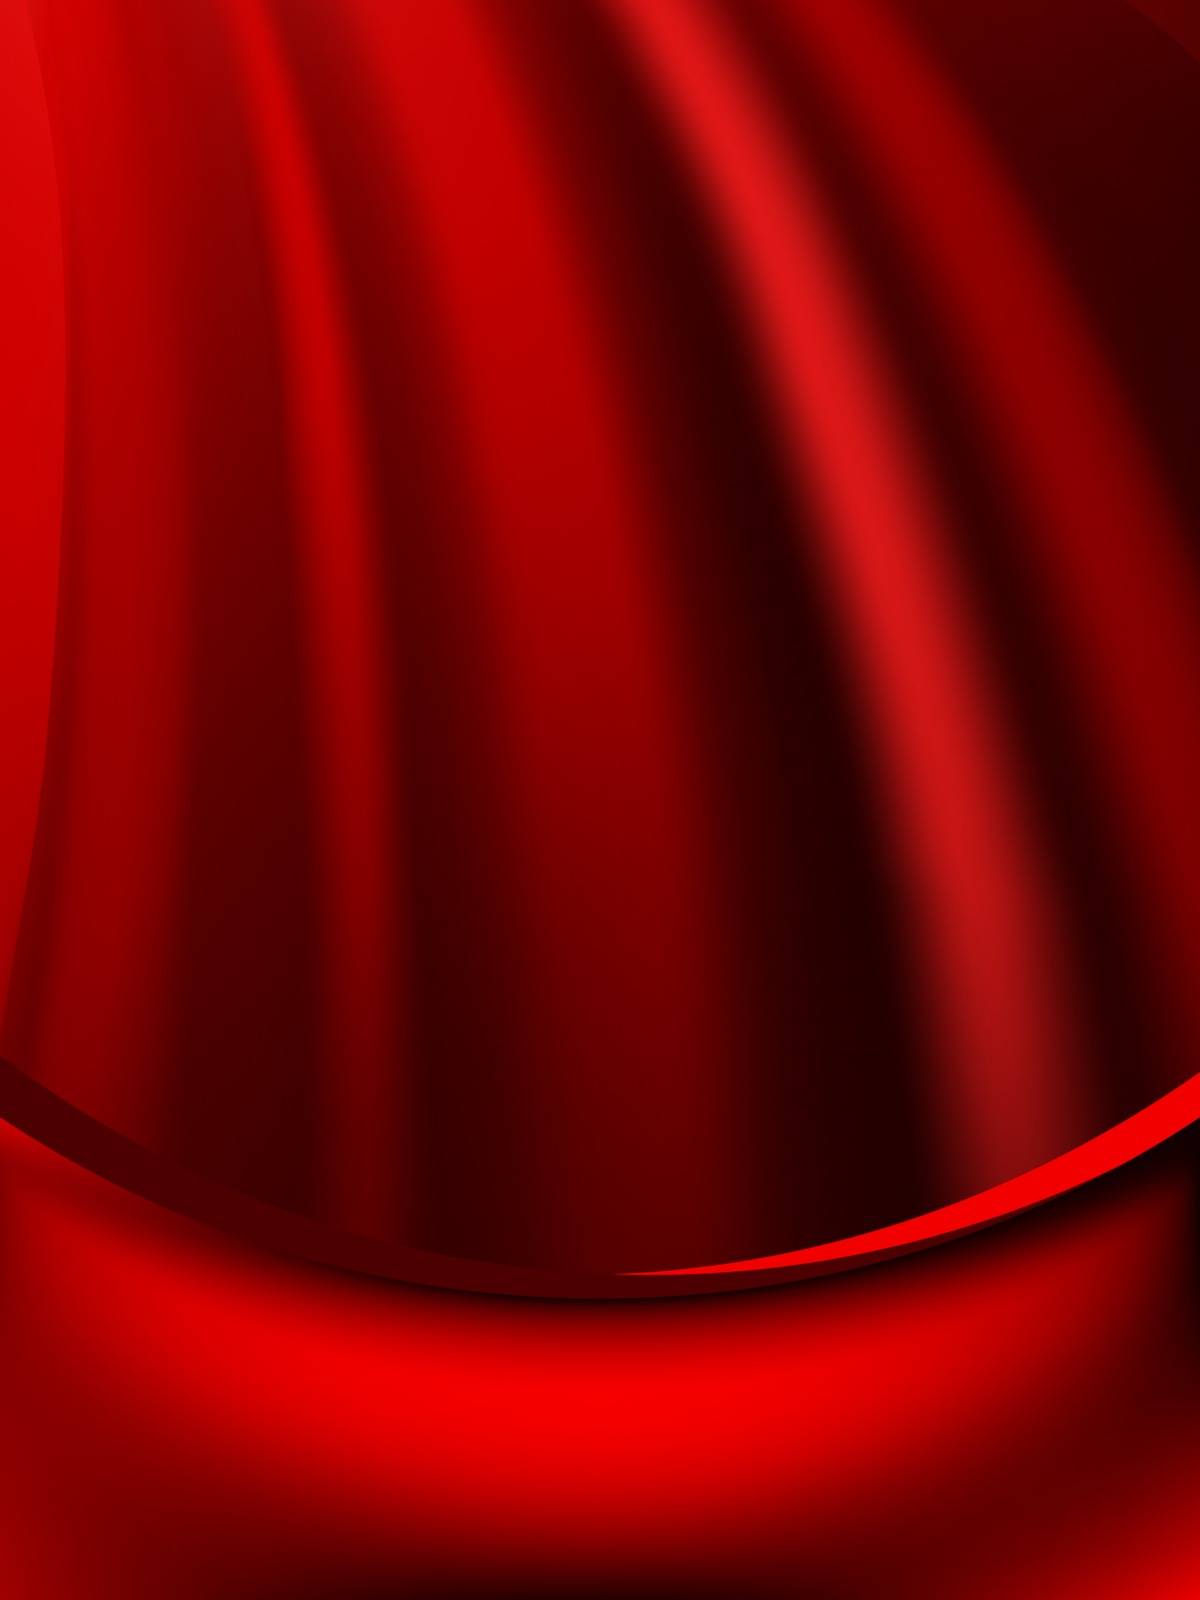 Red curtain fade to dark card. EPS 10 vector file included